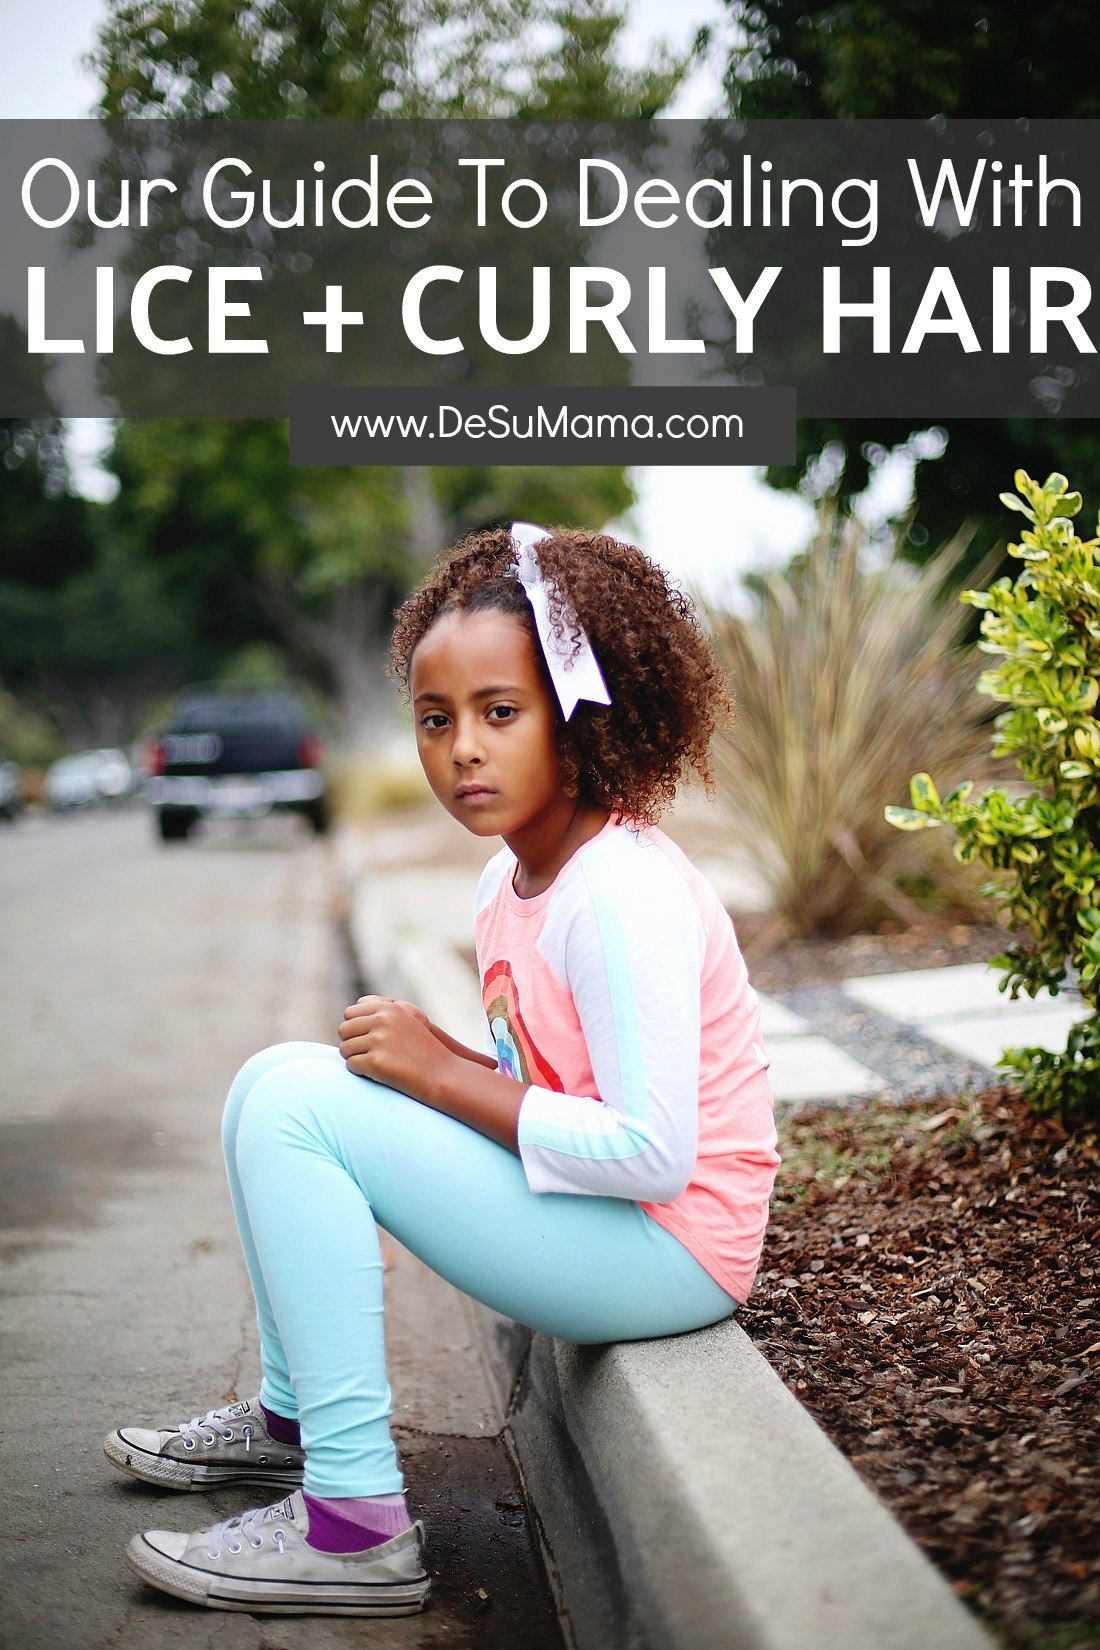 Black People Can Get Lice! How to Treat Lice When Your Have Curly Hair